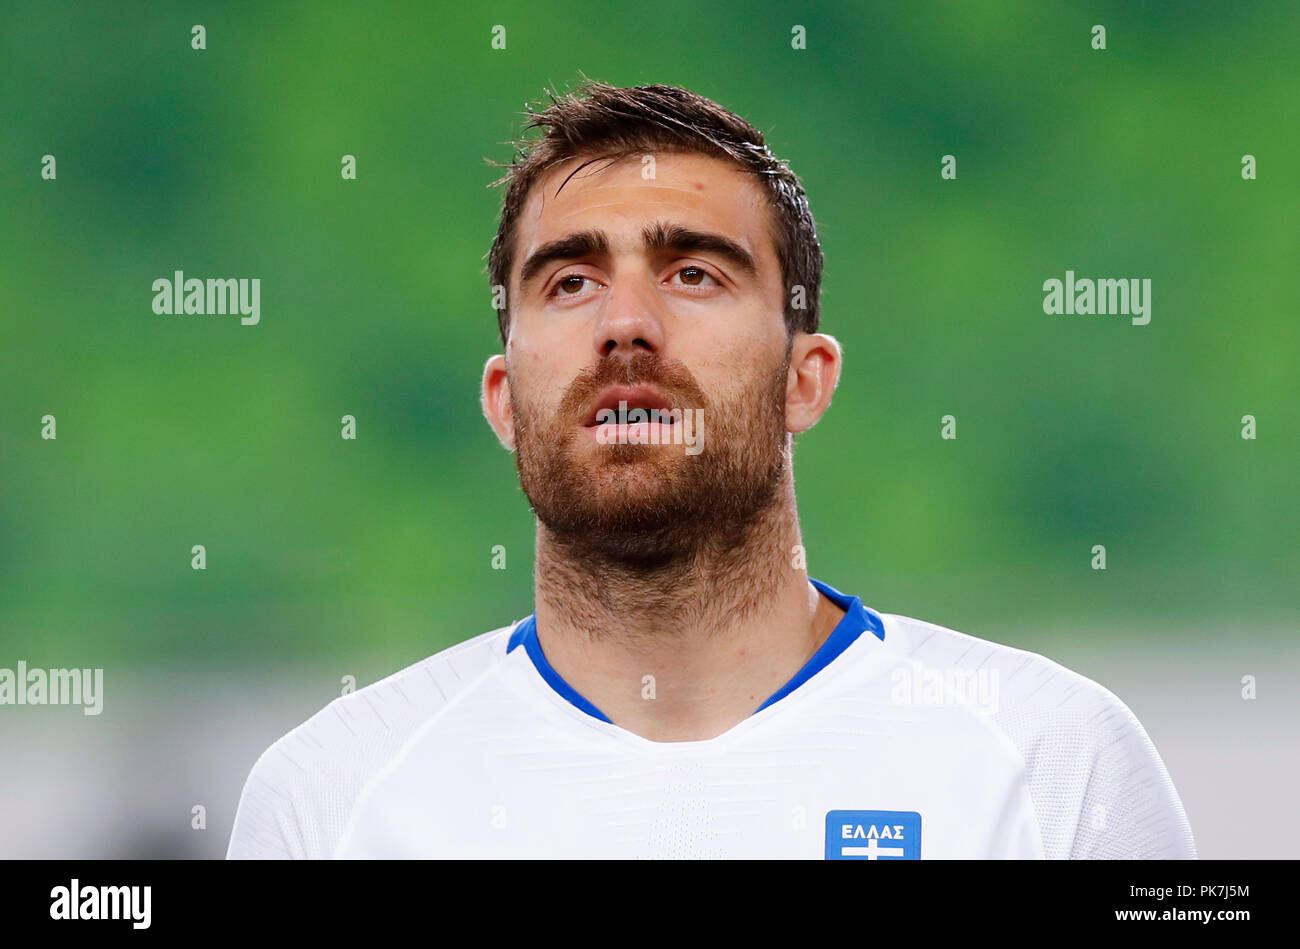 BUDAPEST, HUNGARY - SEPTEMBER 11: Sokratis Papastathopoulos of Greece sings the anthem prior to the UEFA Nations League group stage match between Hungary and Greece at Groupama Arena on September 11, 2018 in Budapest, Hungary. Credit: Laszlo Szirtesi/Alamy Live News Stock Photo